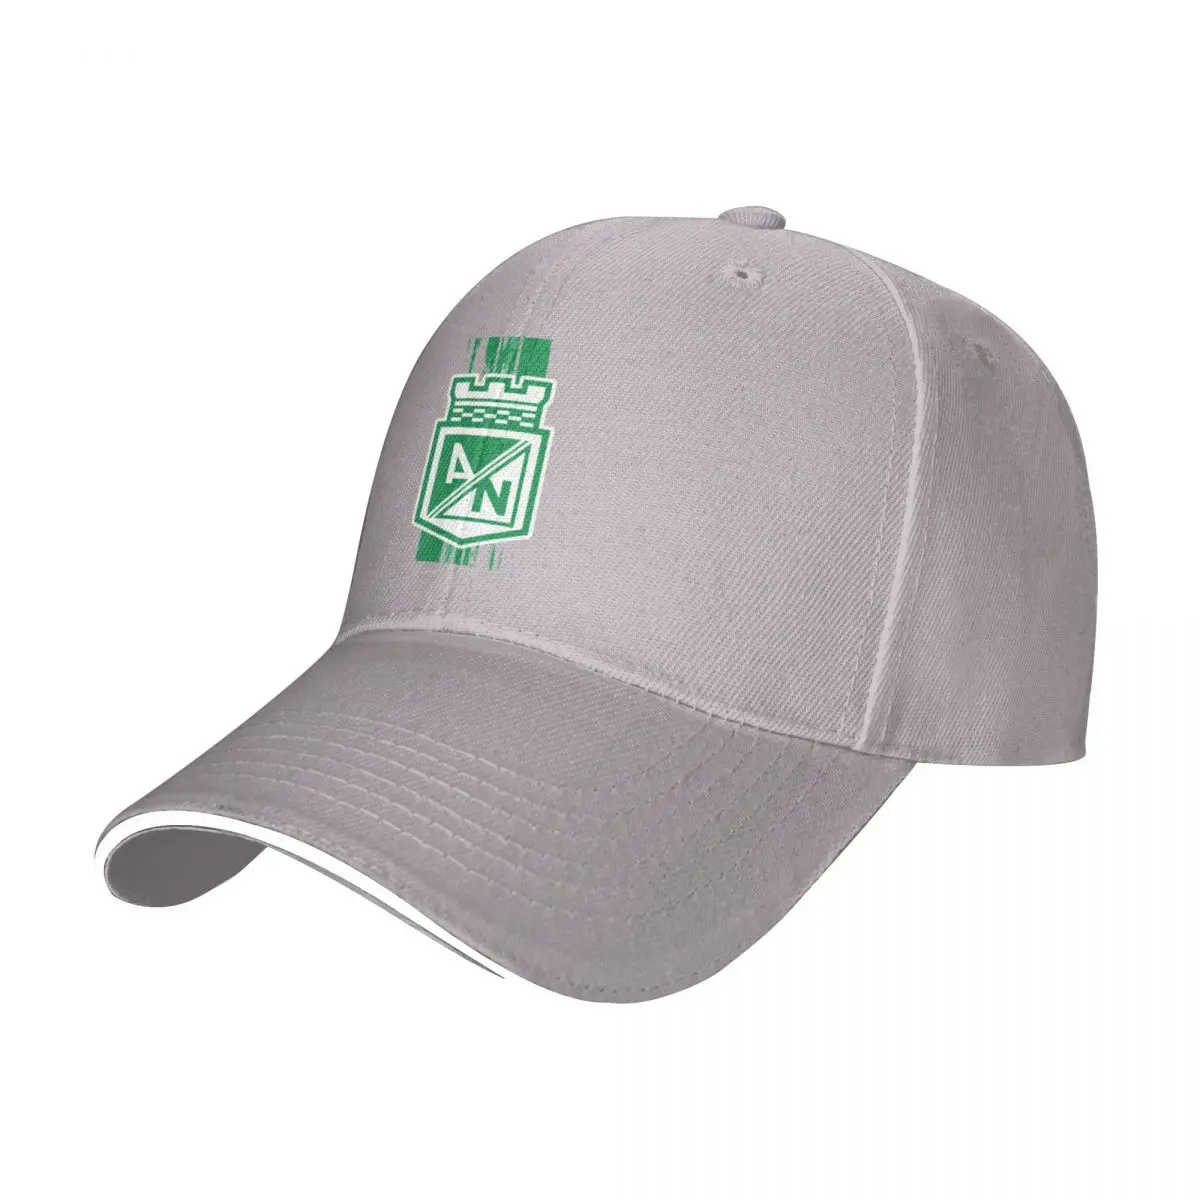 

TOOL Band All For This Colours, My Colours Atletico Nacional Medellin, Colombia Cap Baseball Cap Visor Luxury Woman Cap Men's